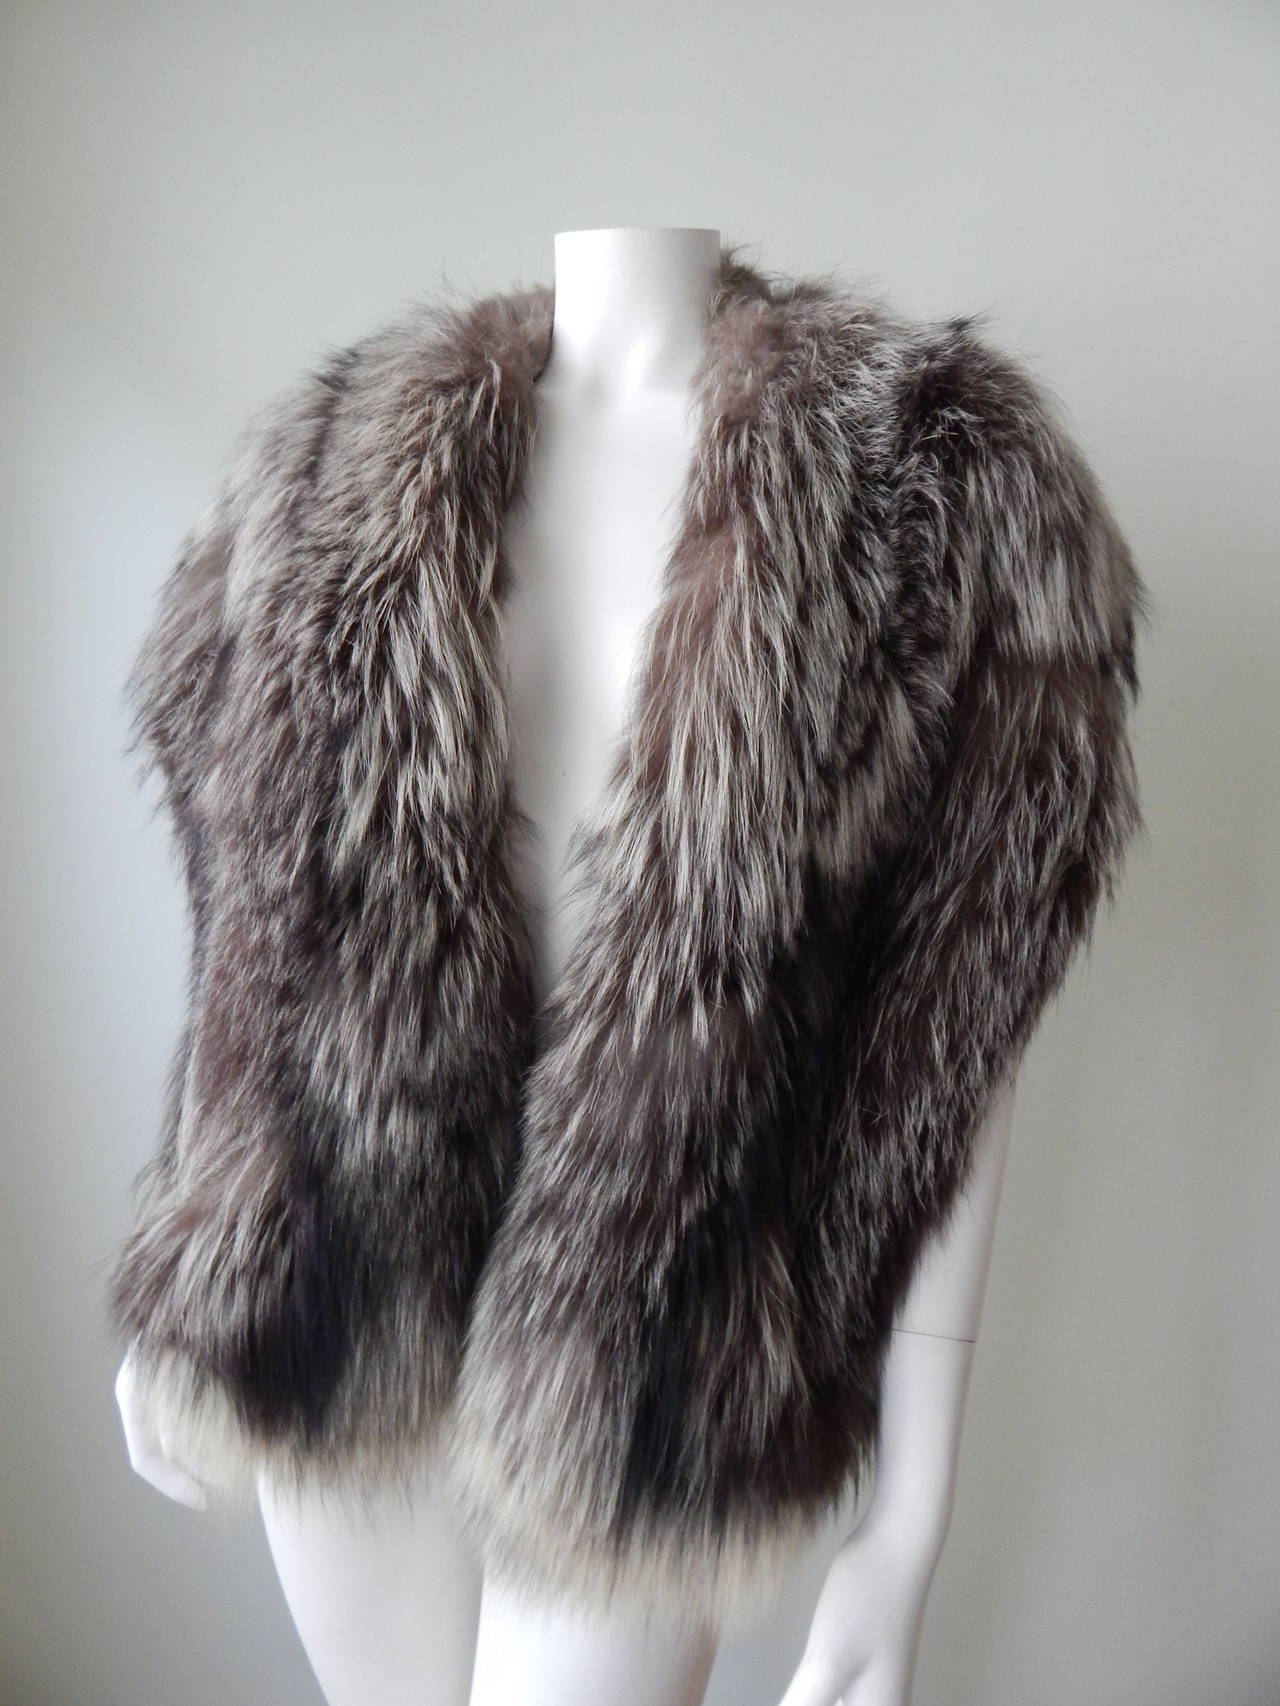 Vintage 1940s 1950s Silver Fox Fur Stole or Shawl. Pockets and Fully Lined in Silk. Excellent Condition.